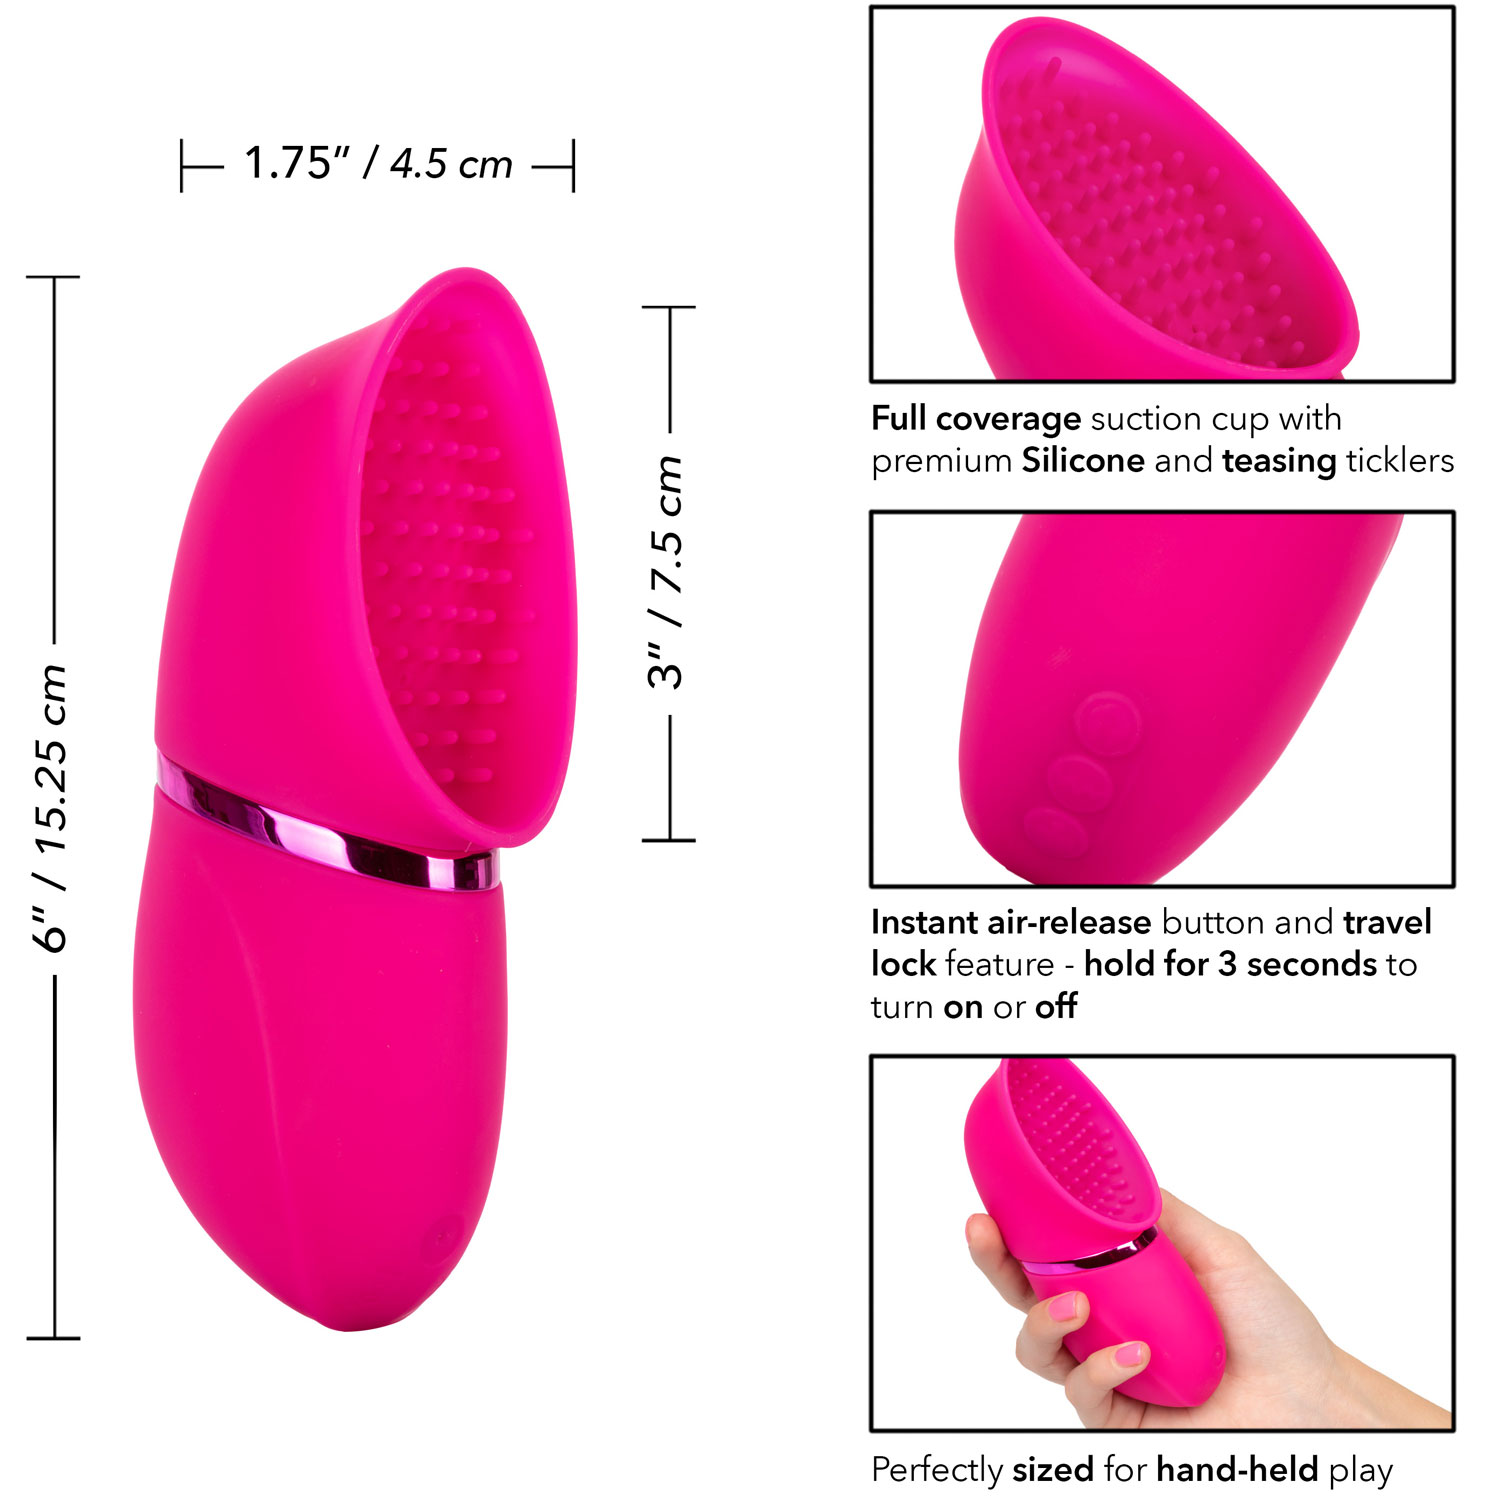 Intimate Pump Rechargeable Silicone Full Coverage Pump - Measurements